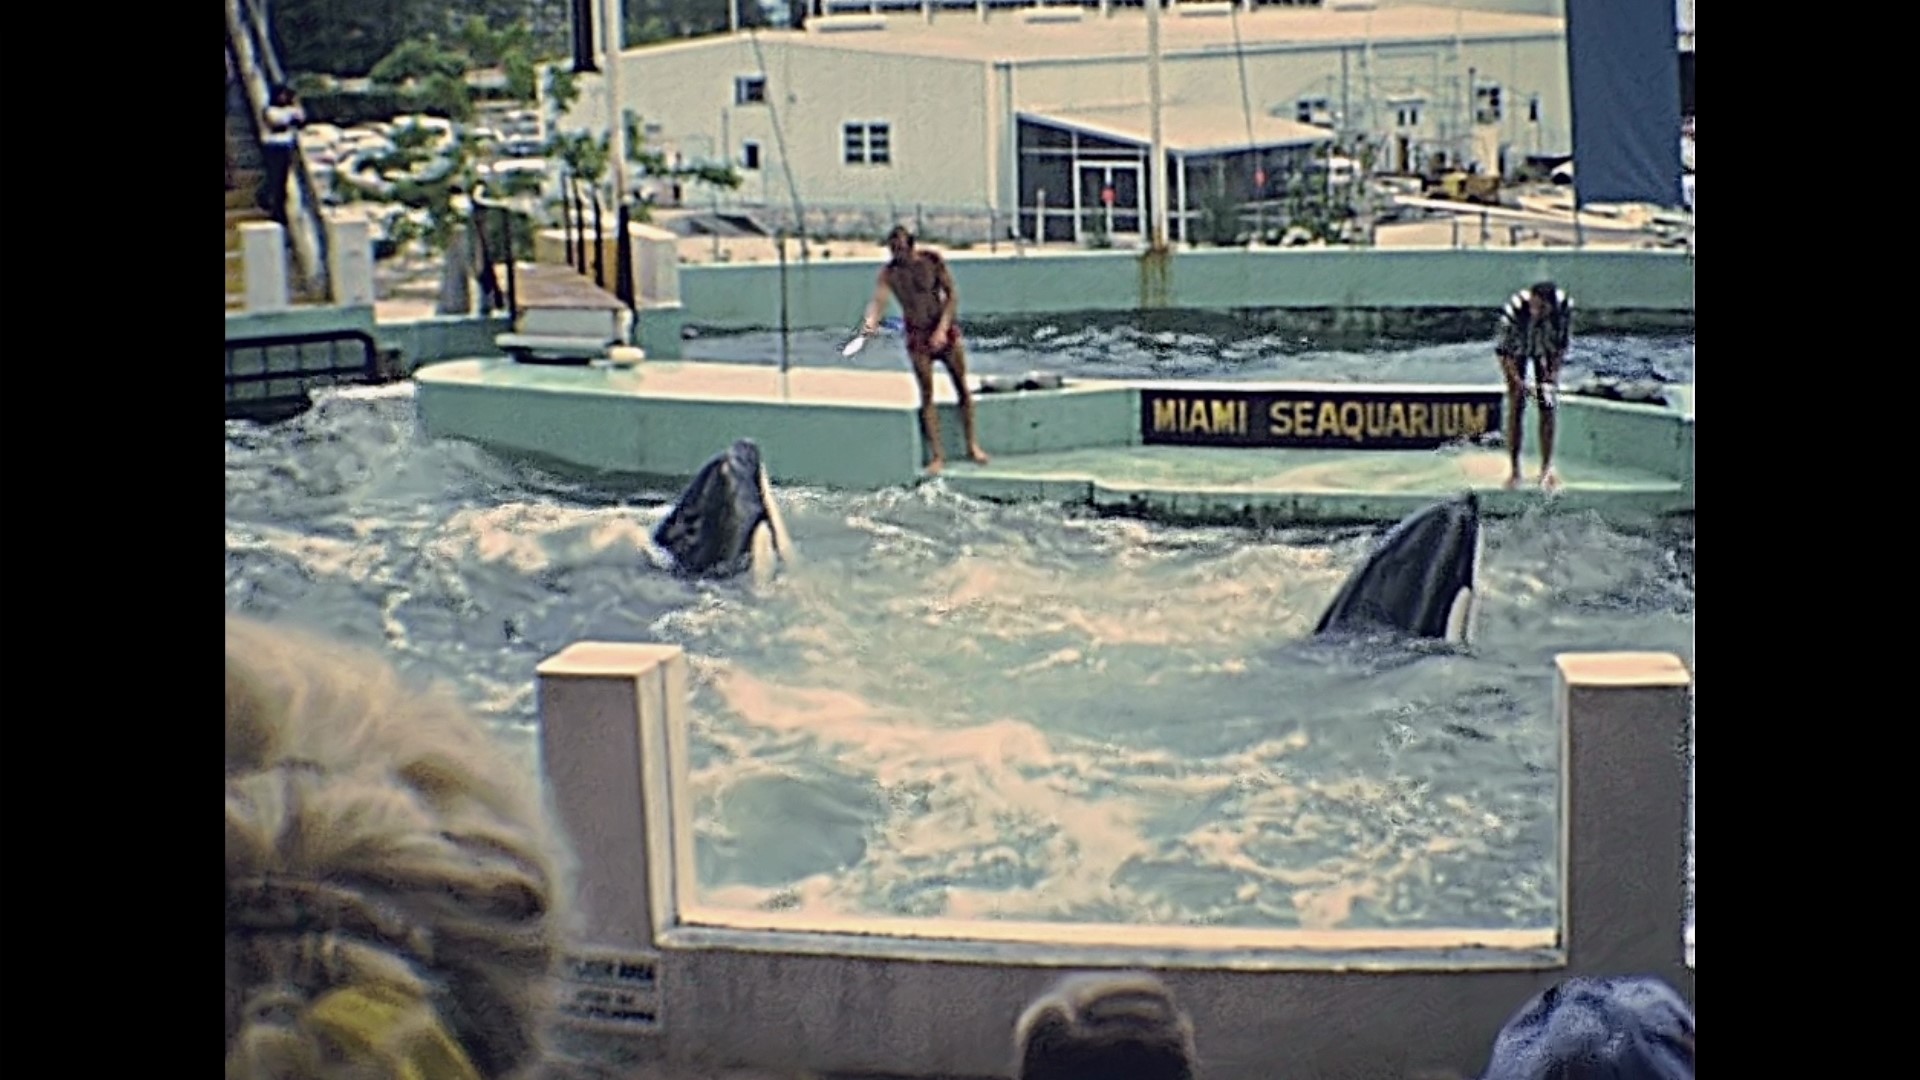 Tokitae and Hugo can be seen on video performing in the "whale bowl" where they lived at the Miami Seaquarium before Hugo's death in 1980.